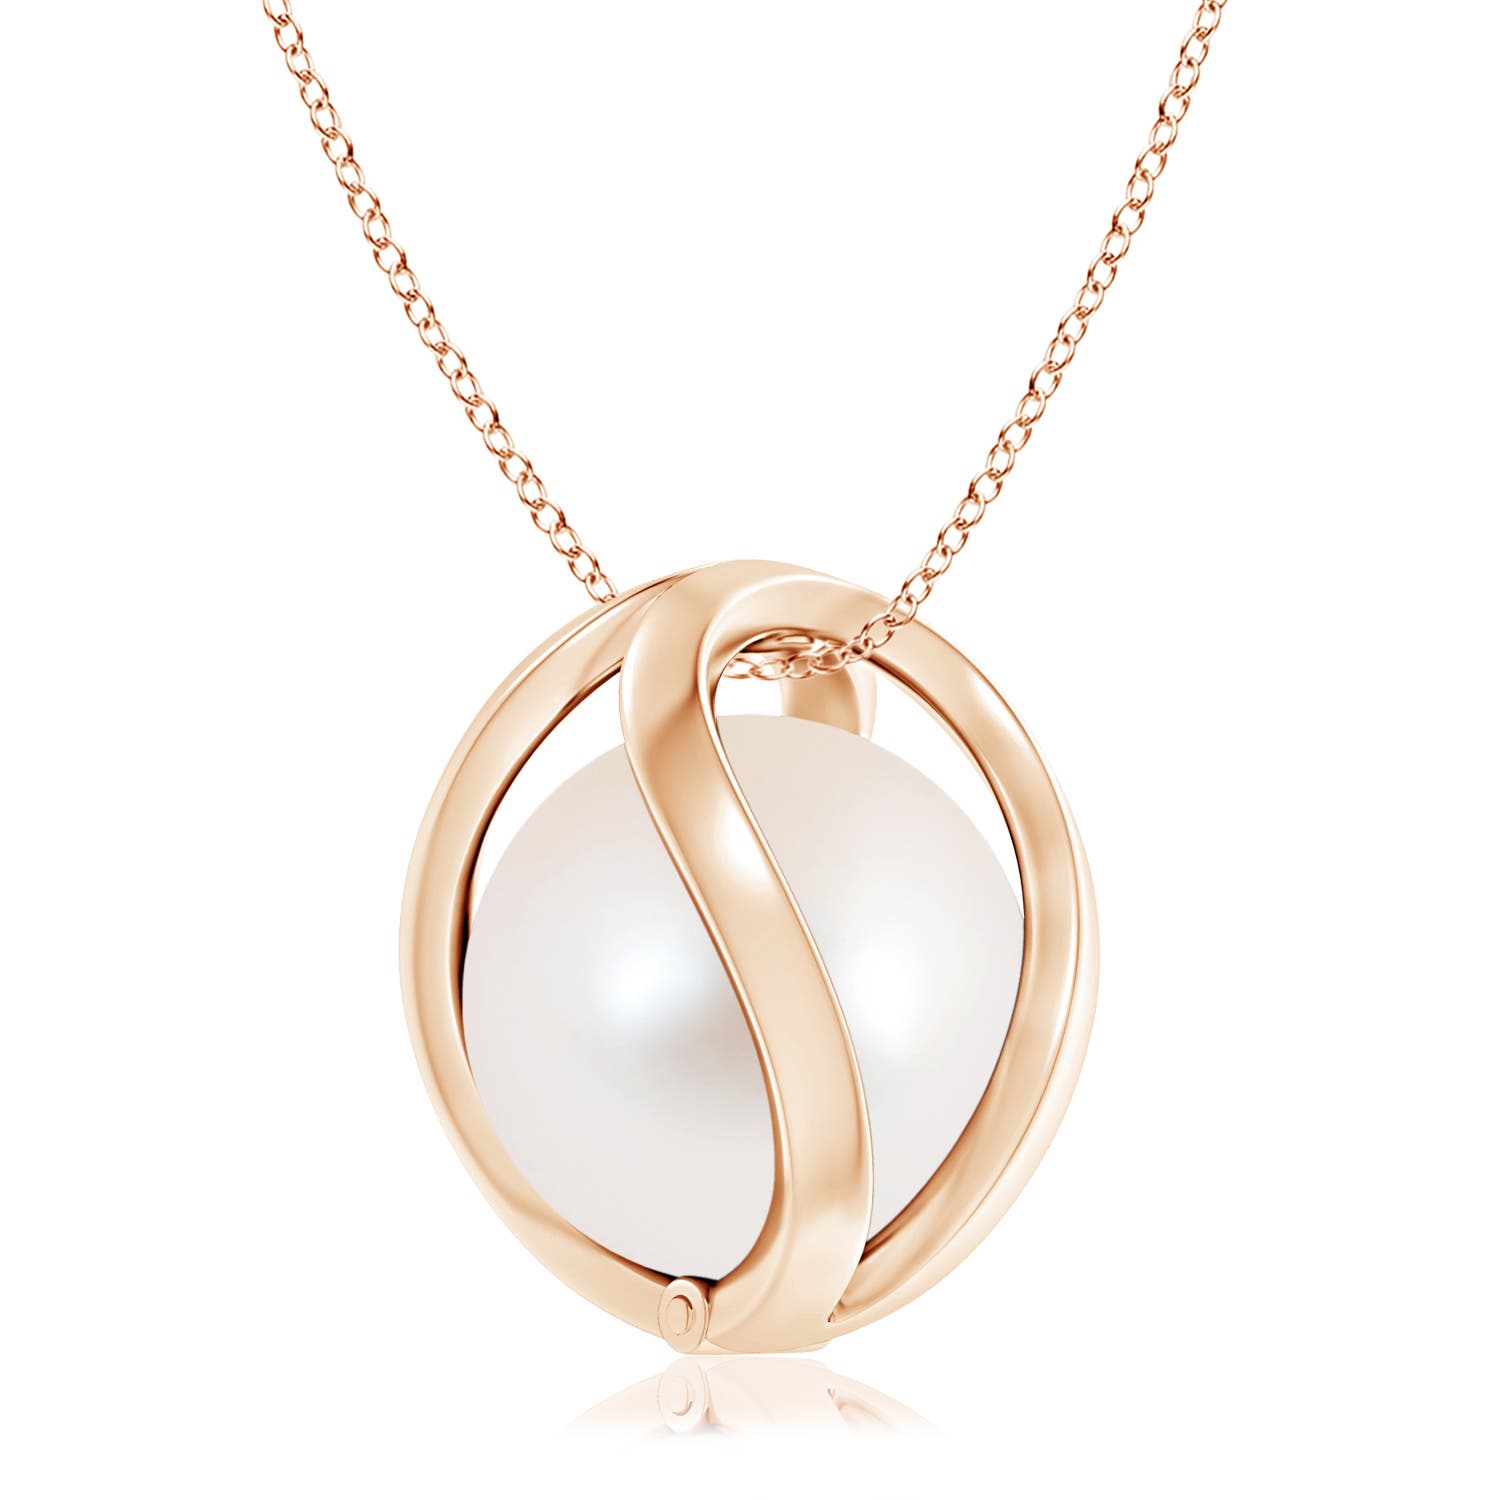 Angara Golden South Sea Pearl Cage Pendant in 14K Rose Gold | 10mm Cabochon Golden South Sea Cultured Pearl Pendant